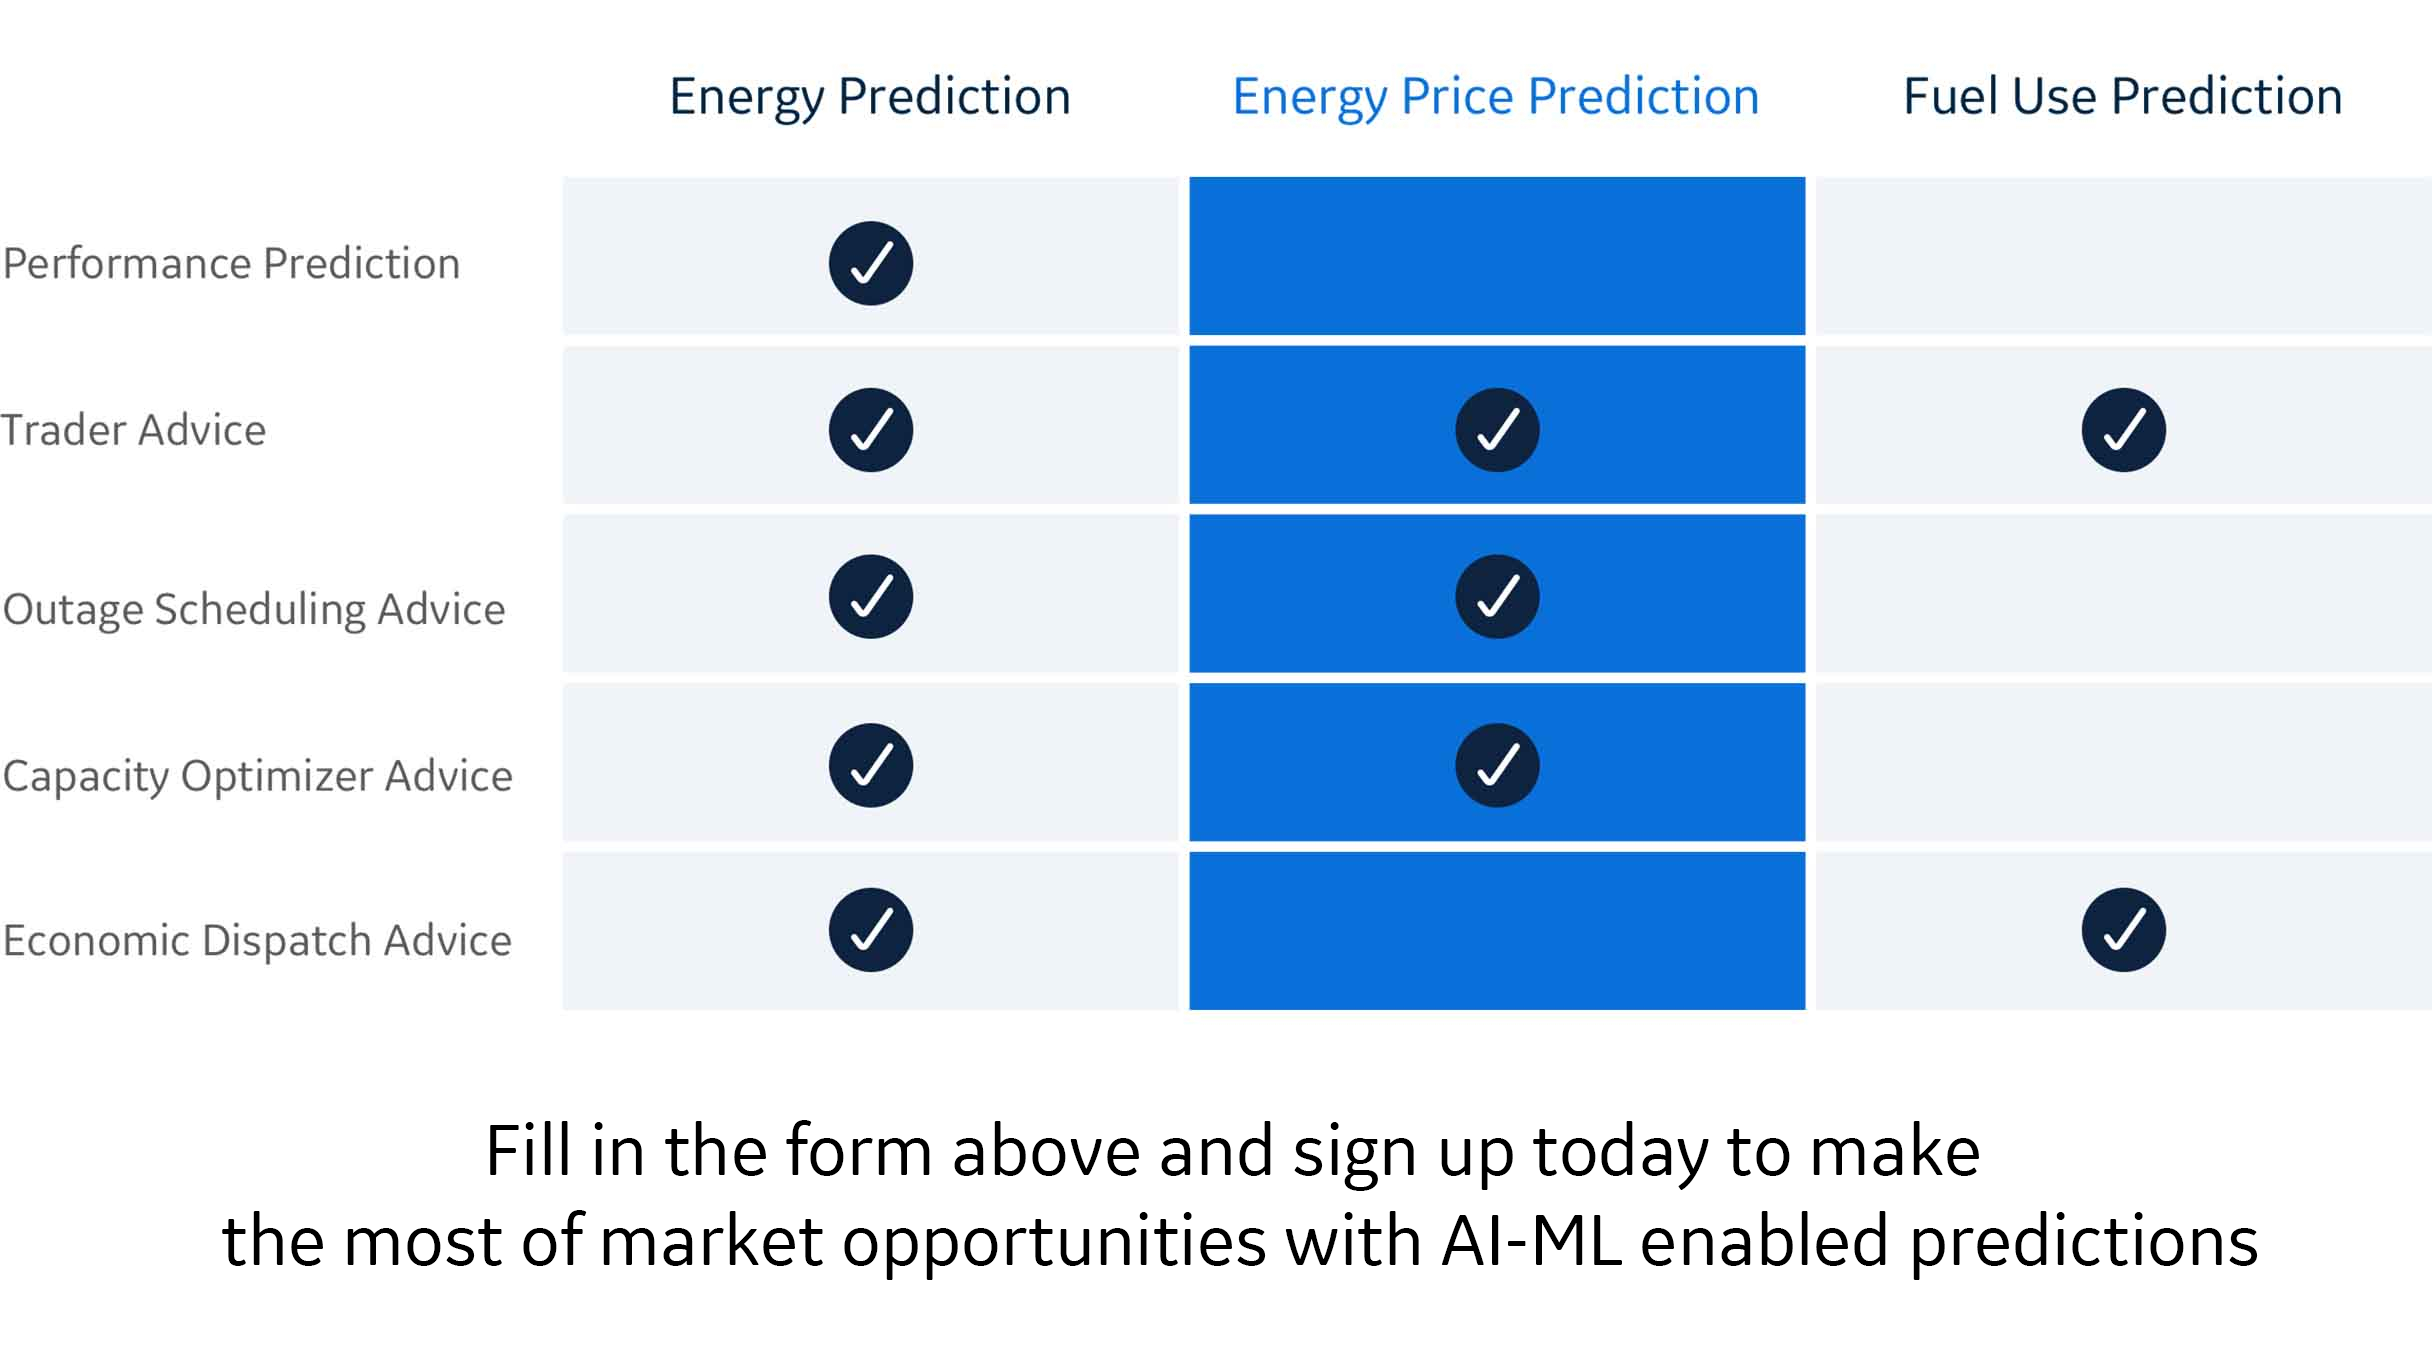 Make the most of market opportunities with GE Digital's energy price predictions software